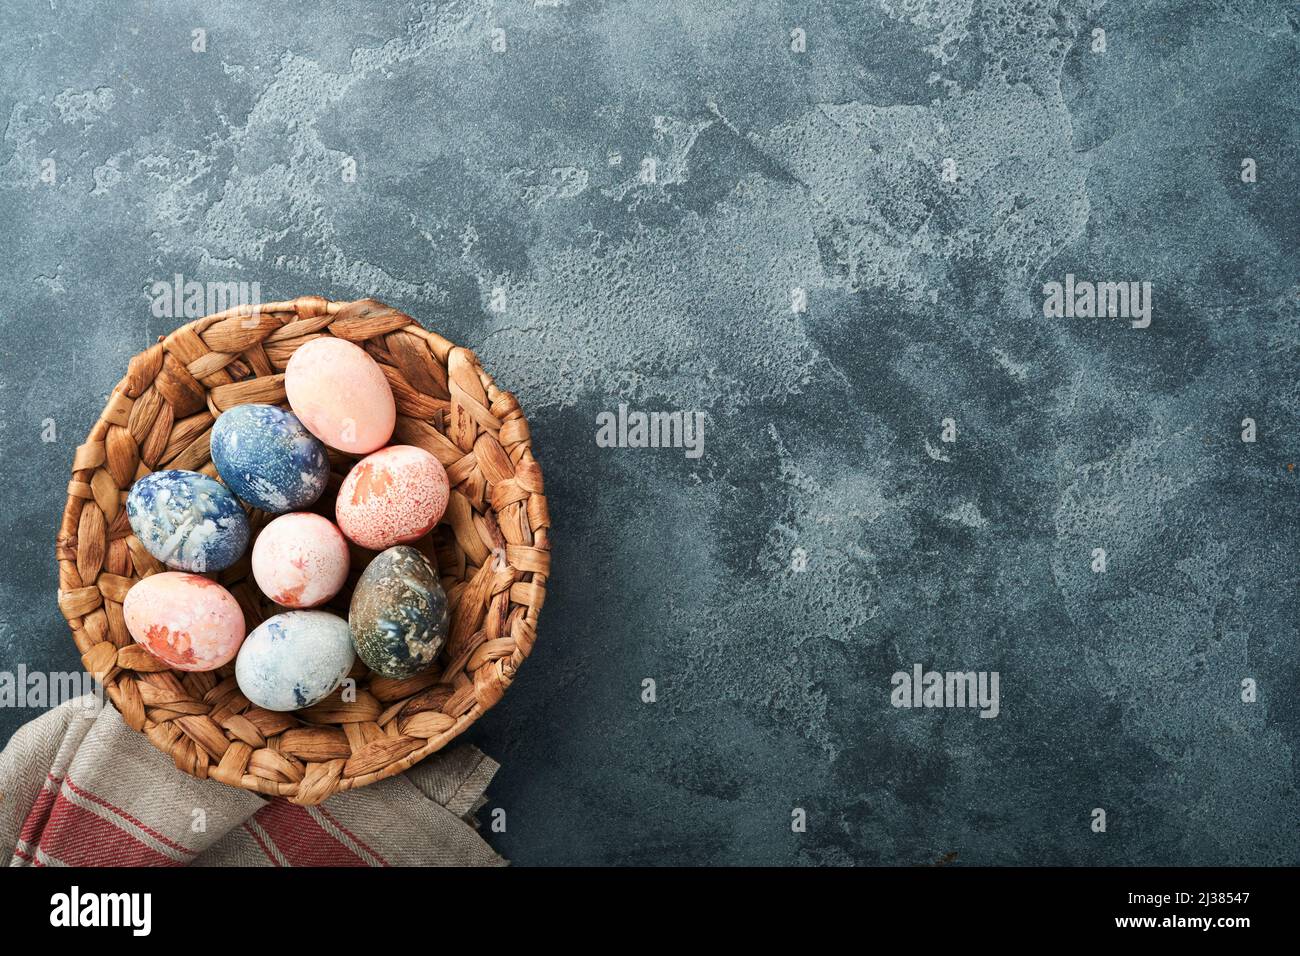 Easter eggs. Dyed Easter eggs with marble stone effect ref and blue color in rustic style on dark stone background. Easter background. Top view. Stock Photo